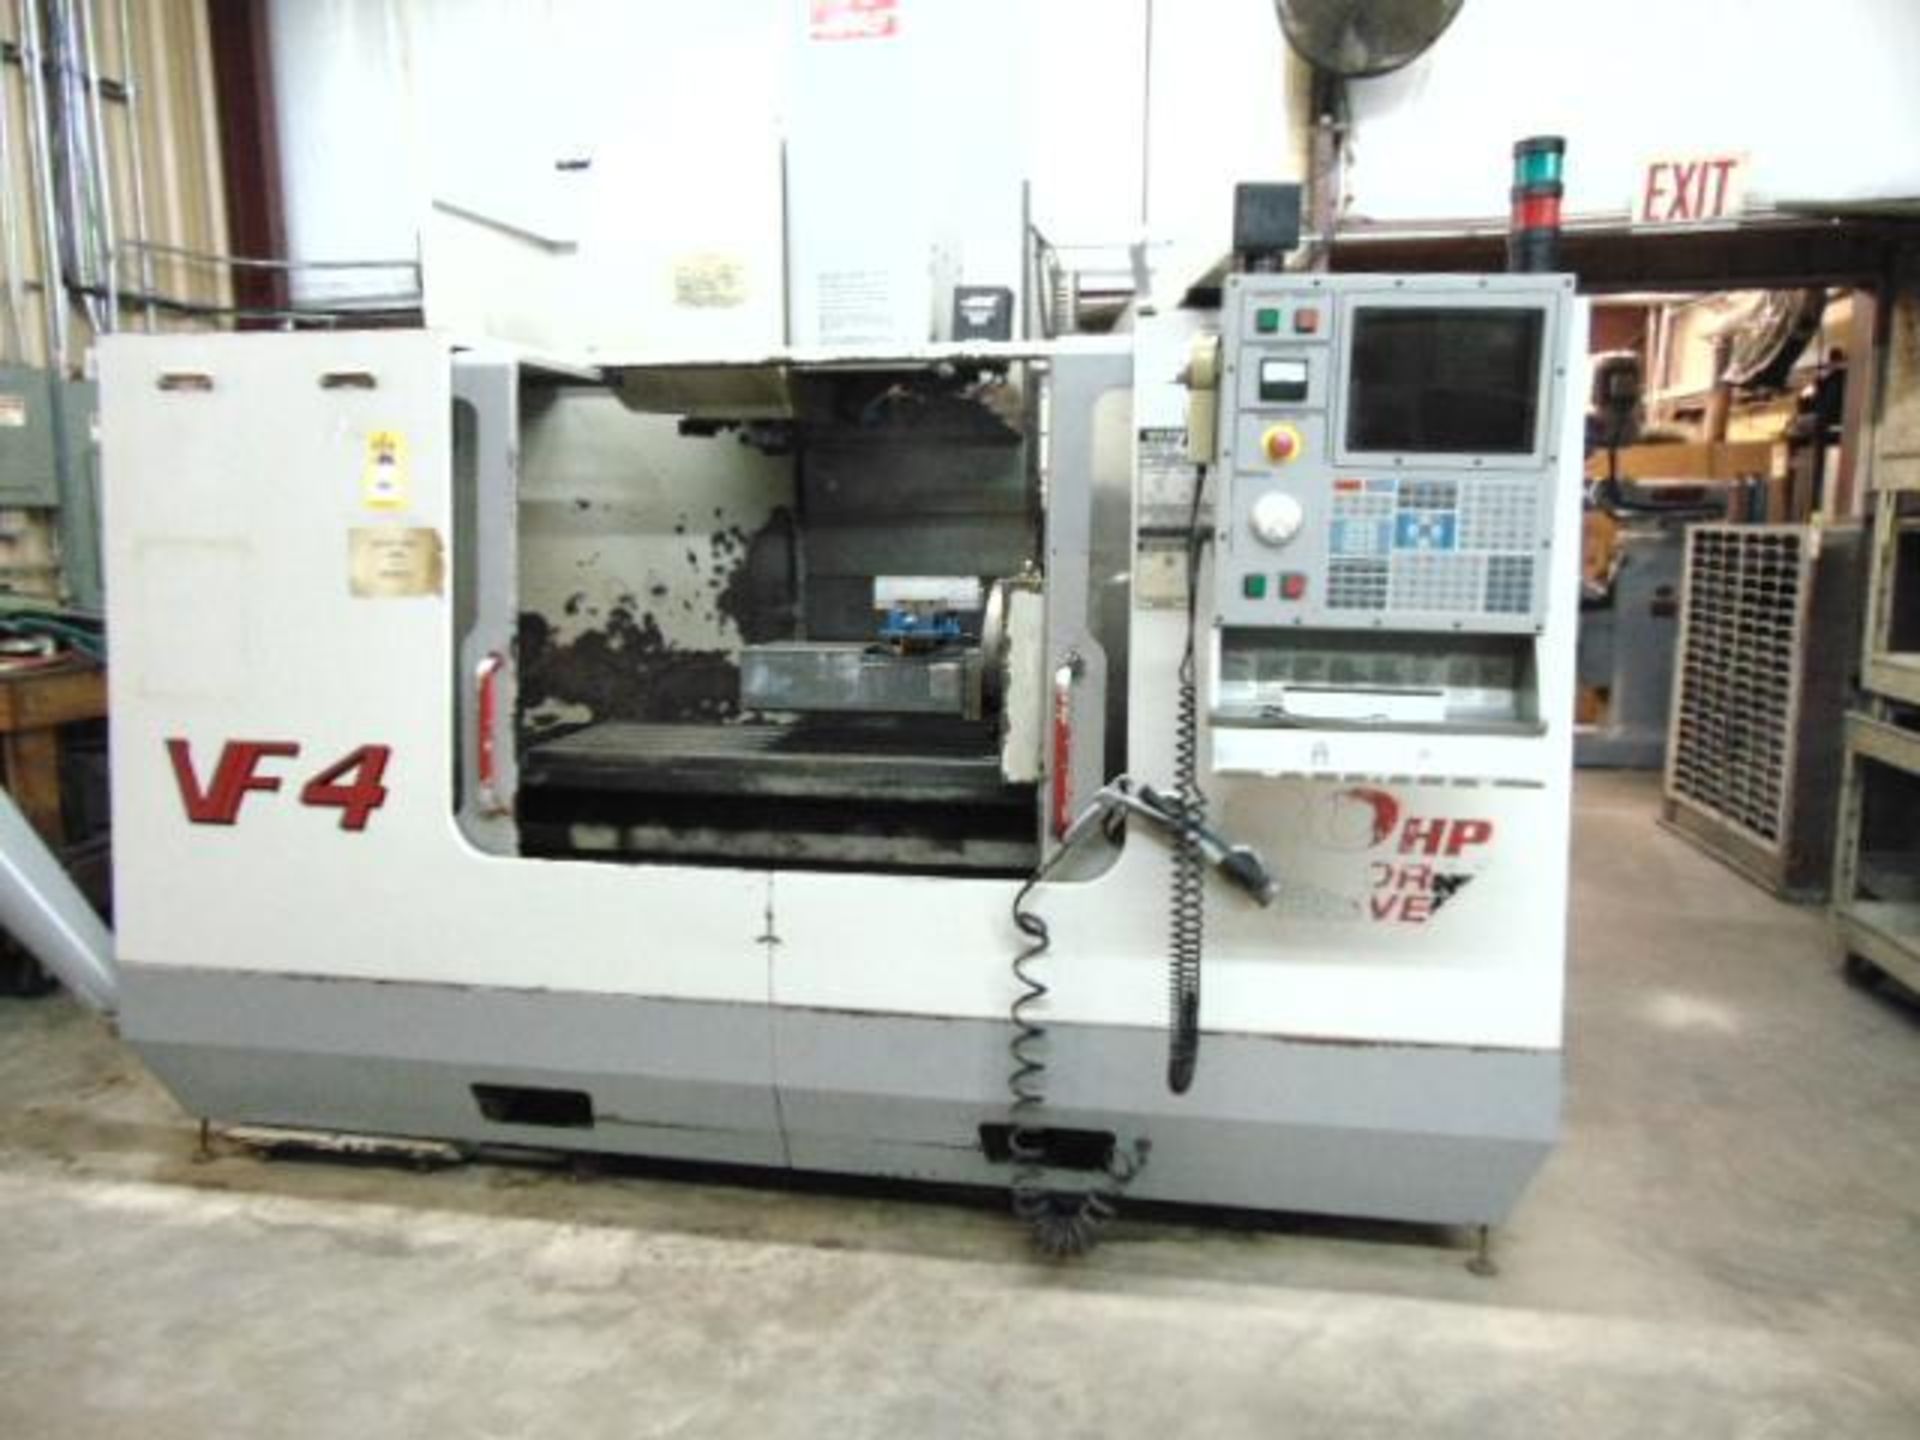 5-AXIS VERTICAL MACHINING CENTER, HAAS MDL. VF-4, new 2000, 52" x 19.5" tbl. size, 50" X, 20" Y, 25"